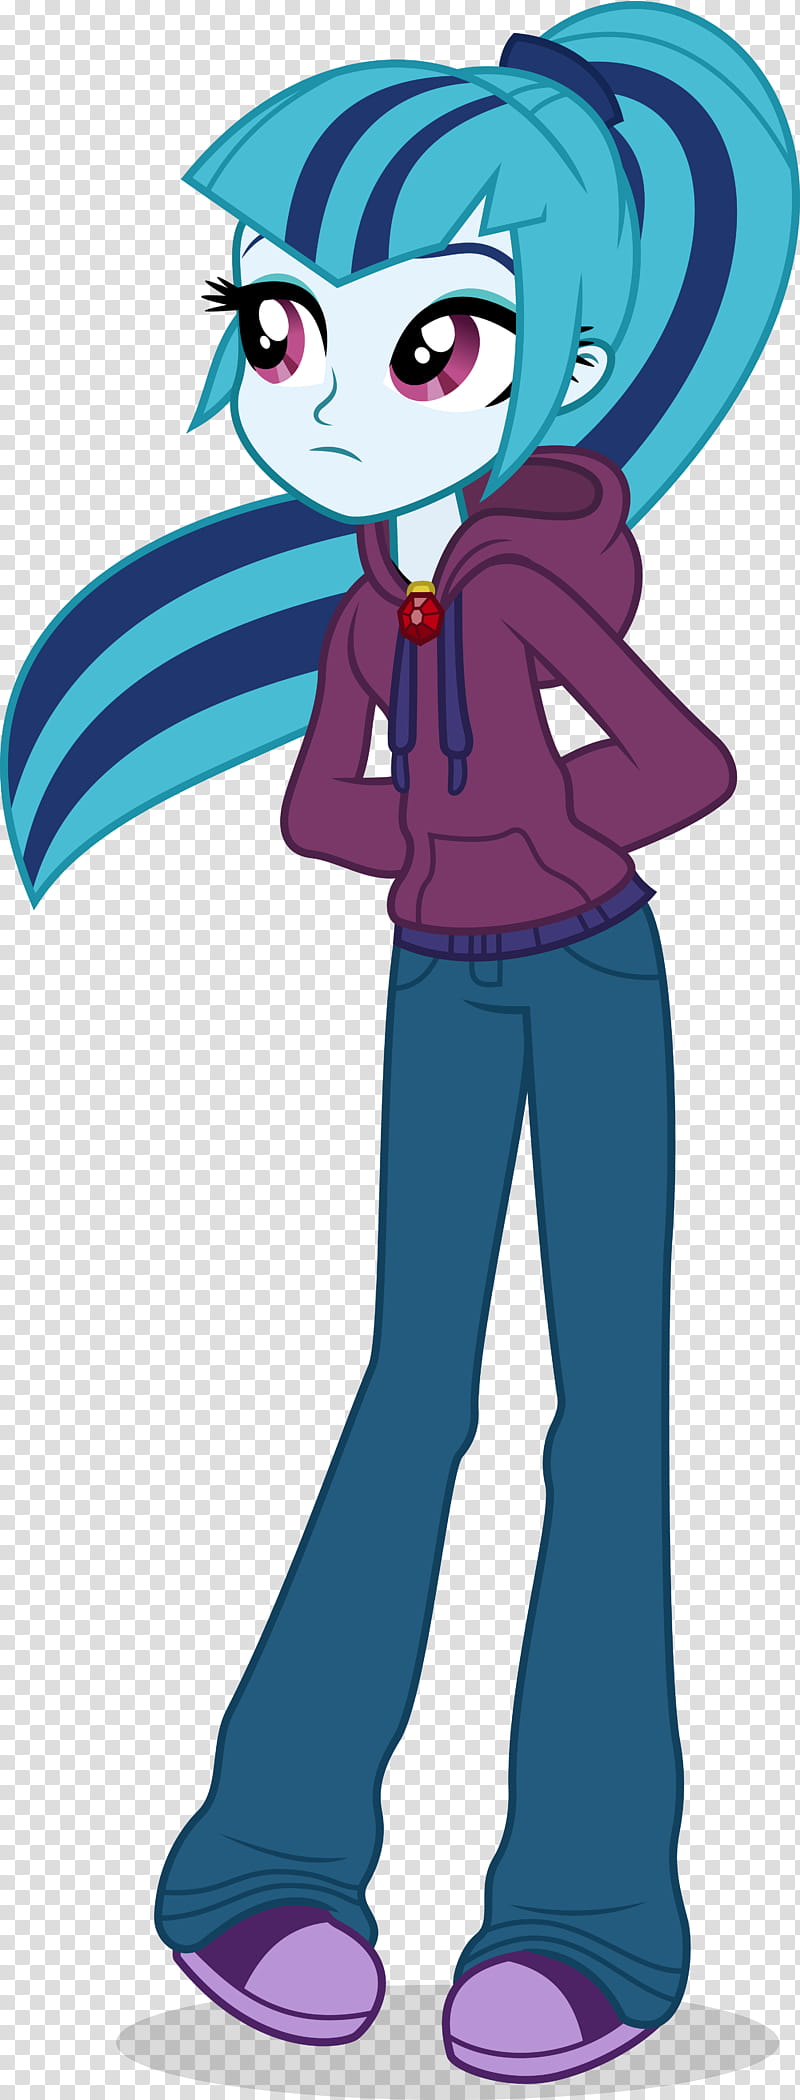 Sonata is Arguably Best Human transparent background PNG clipart